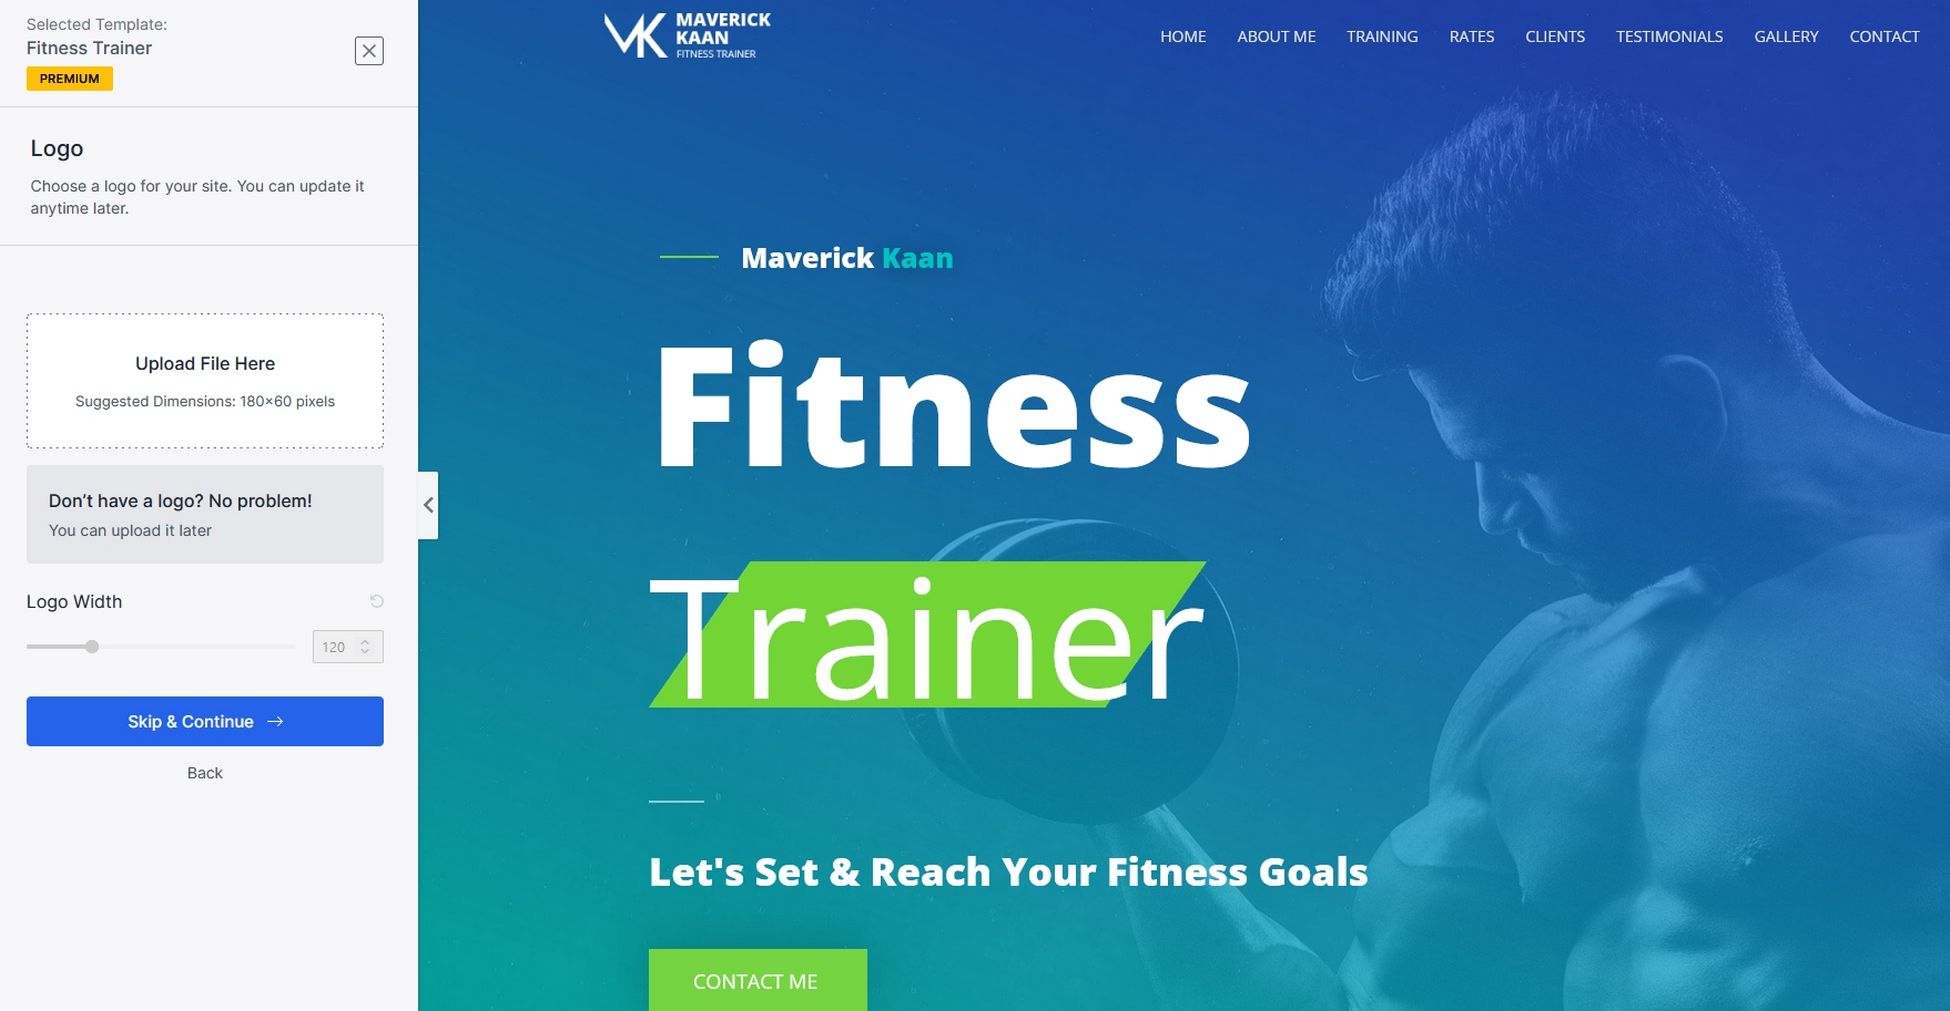 Fitness trainer template